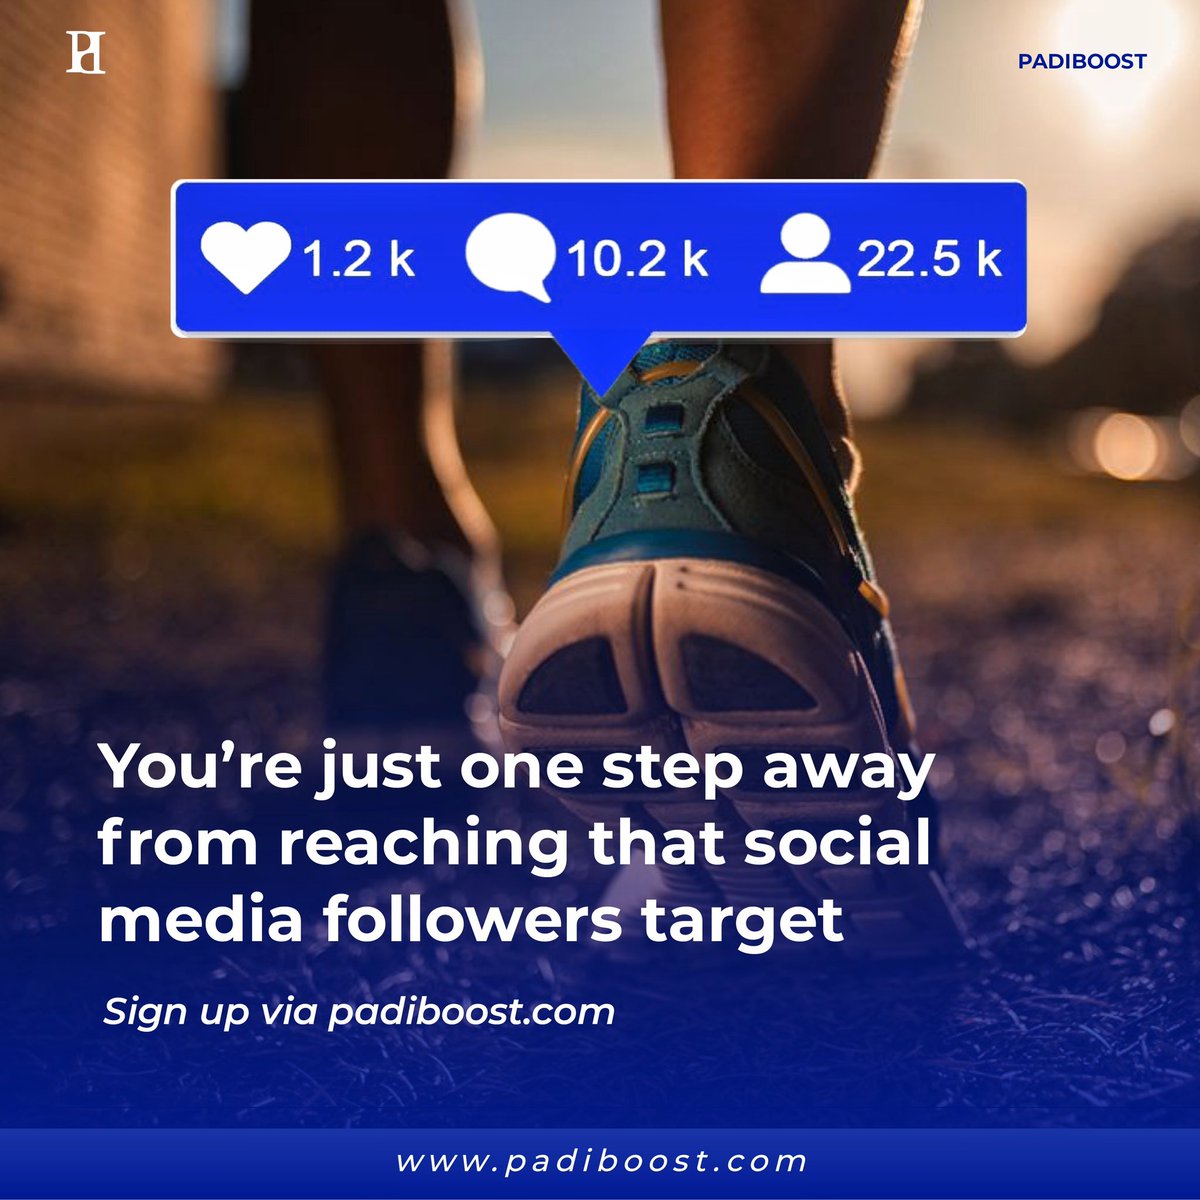 Are you looking to reach that social media target followers, Padiboost is here to serve you better. Sign up on padiboost by clicking padiboost.com #bachelor #hartaberfair